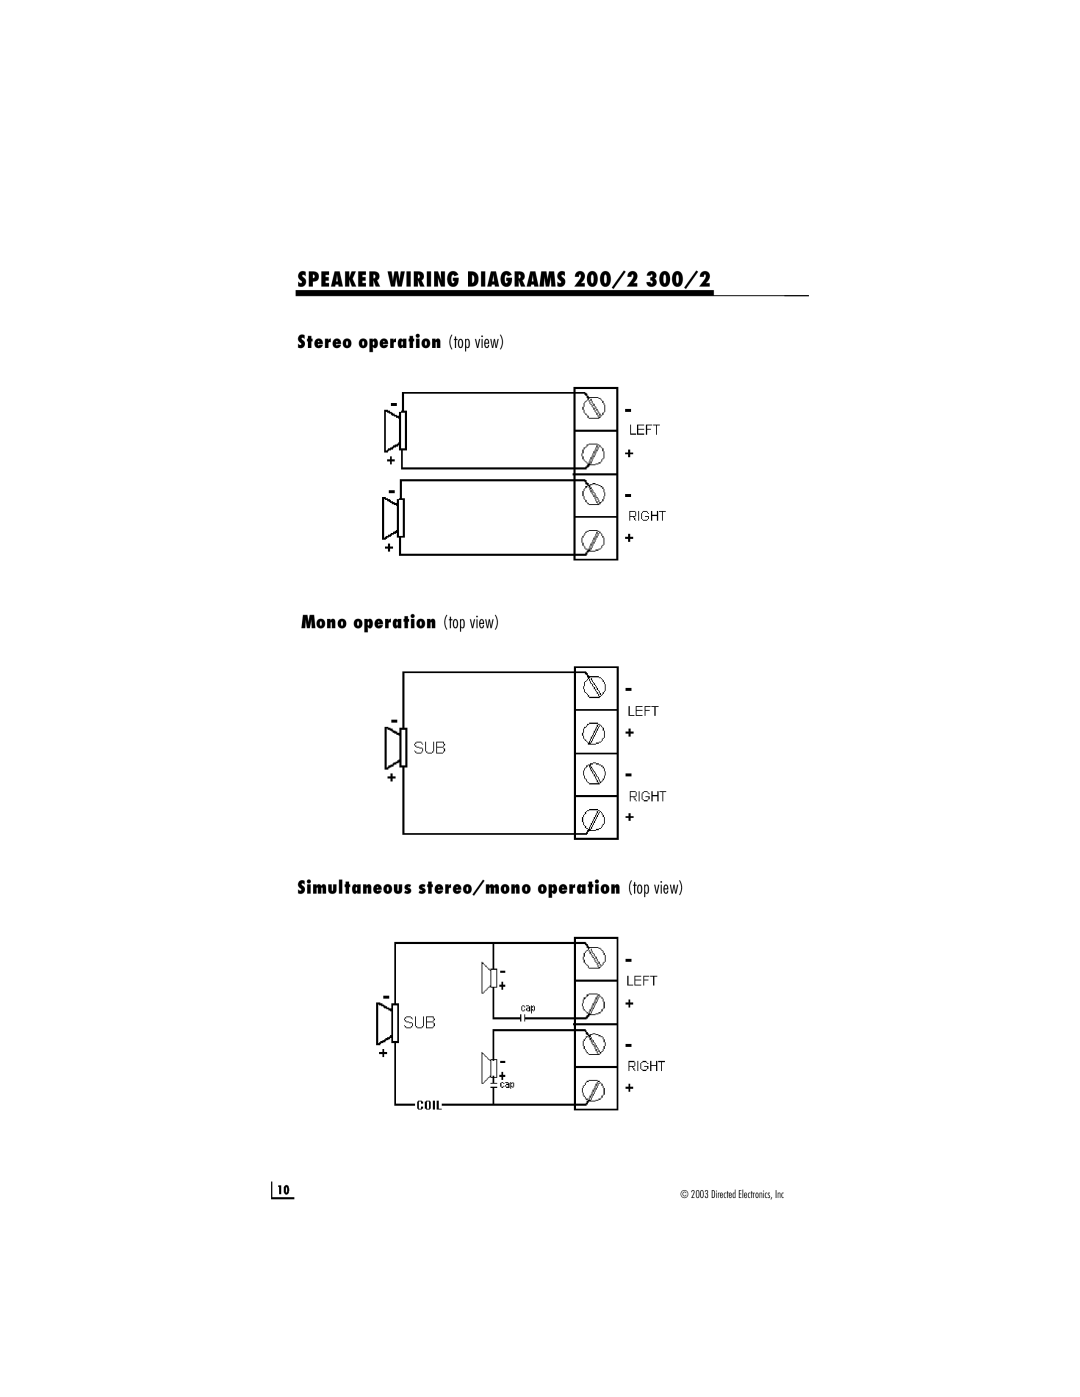 Directed Audio 250/4 manual SPEAKER WIRING DIAGRAMS 200/2 300/2, Stereo operation top view Mono operation top view 